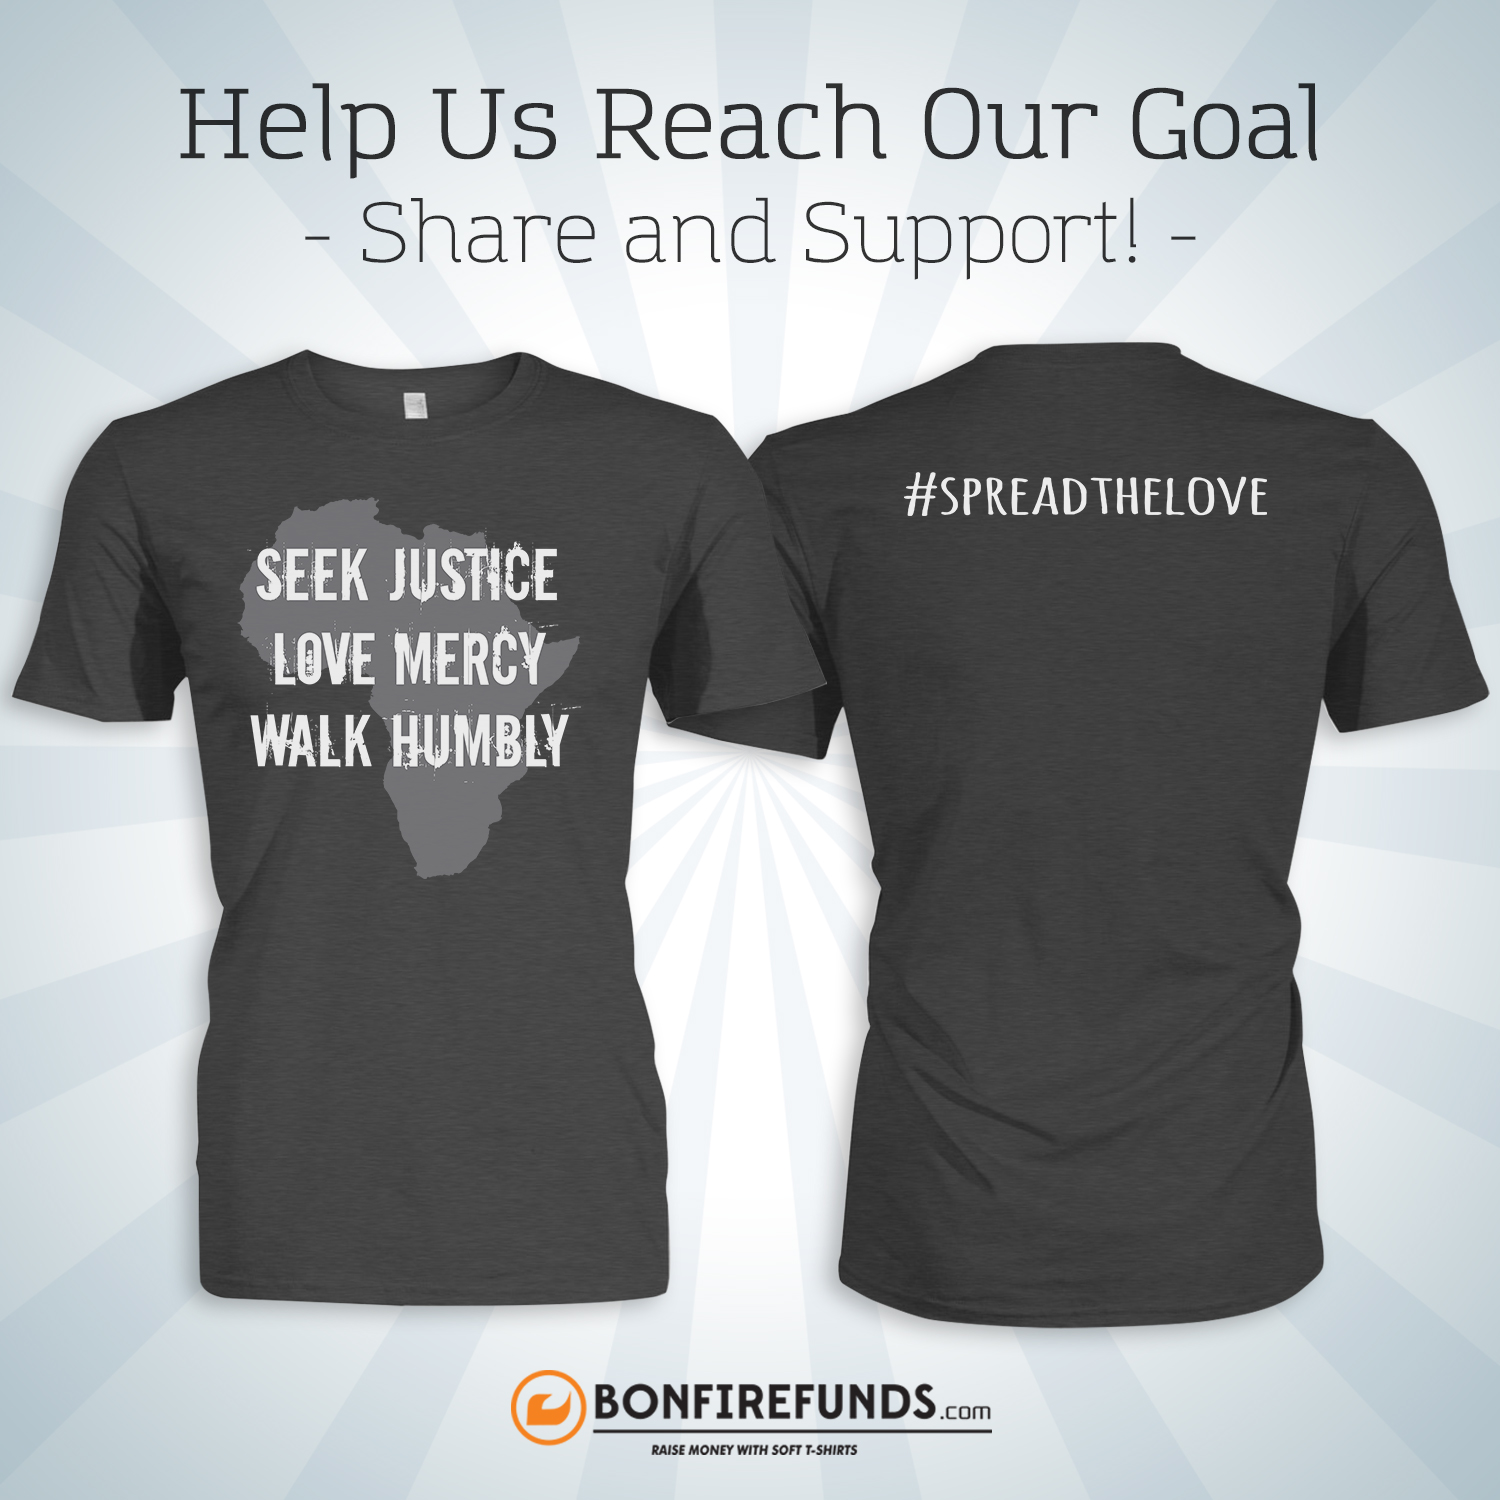 We have adoption t-shirts available for sale!